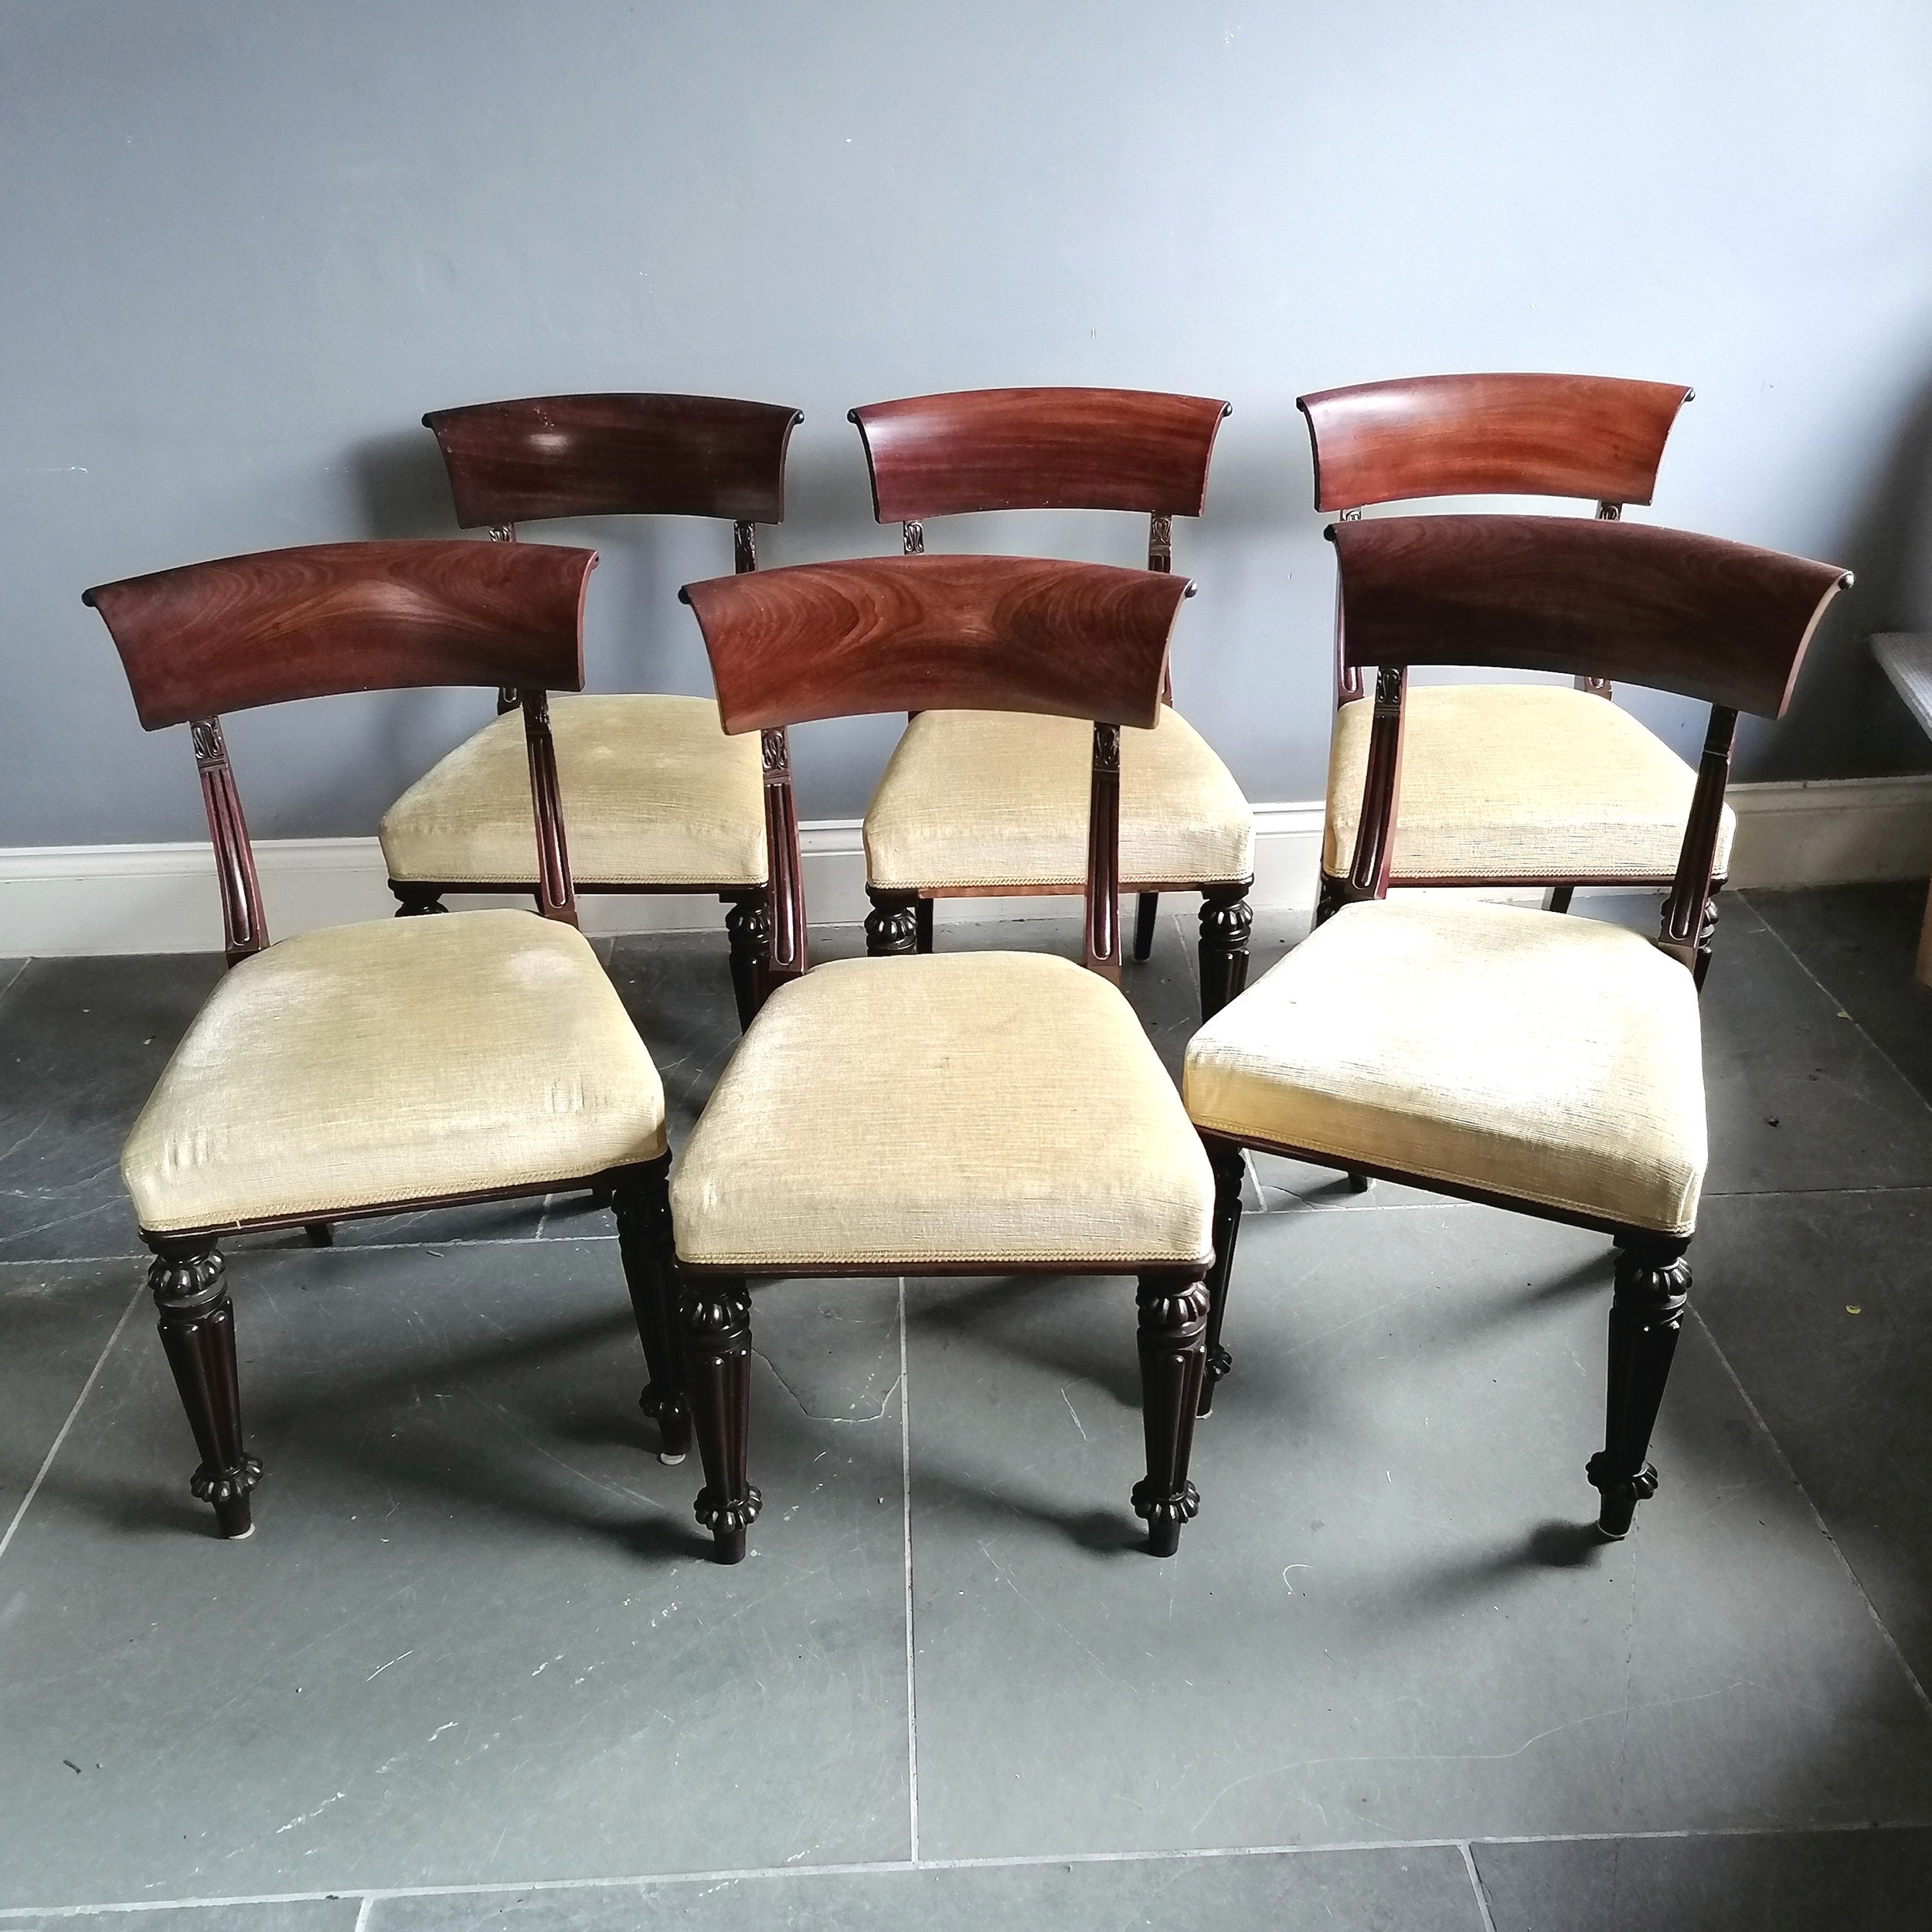 Set of 6 antique rosewood bar back dining chairs with upholstered seats 85cm high x 48cm wide x 43cm